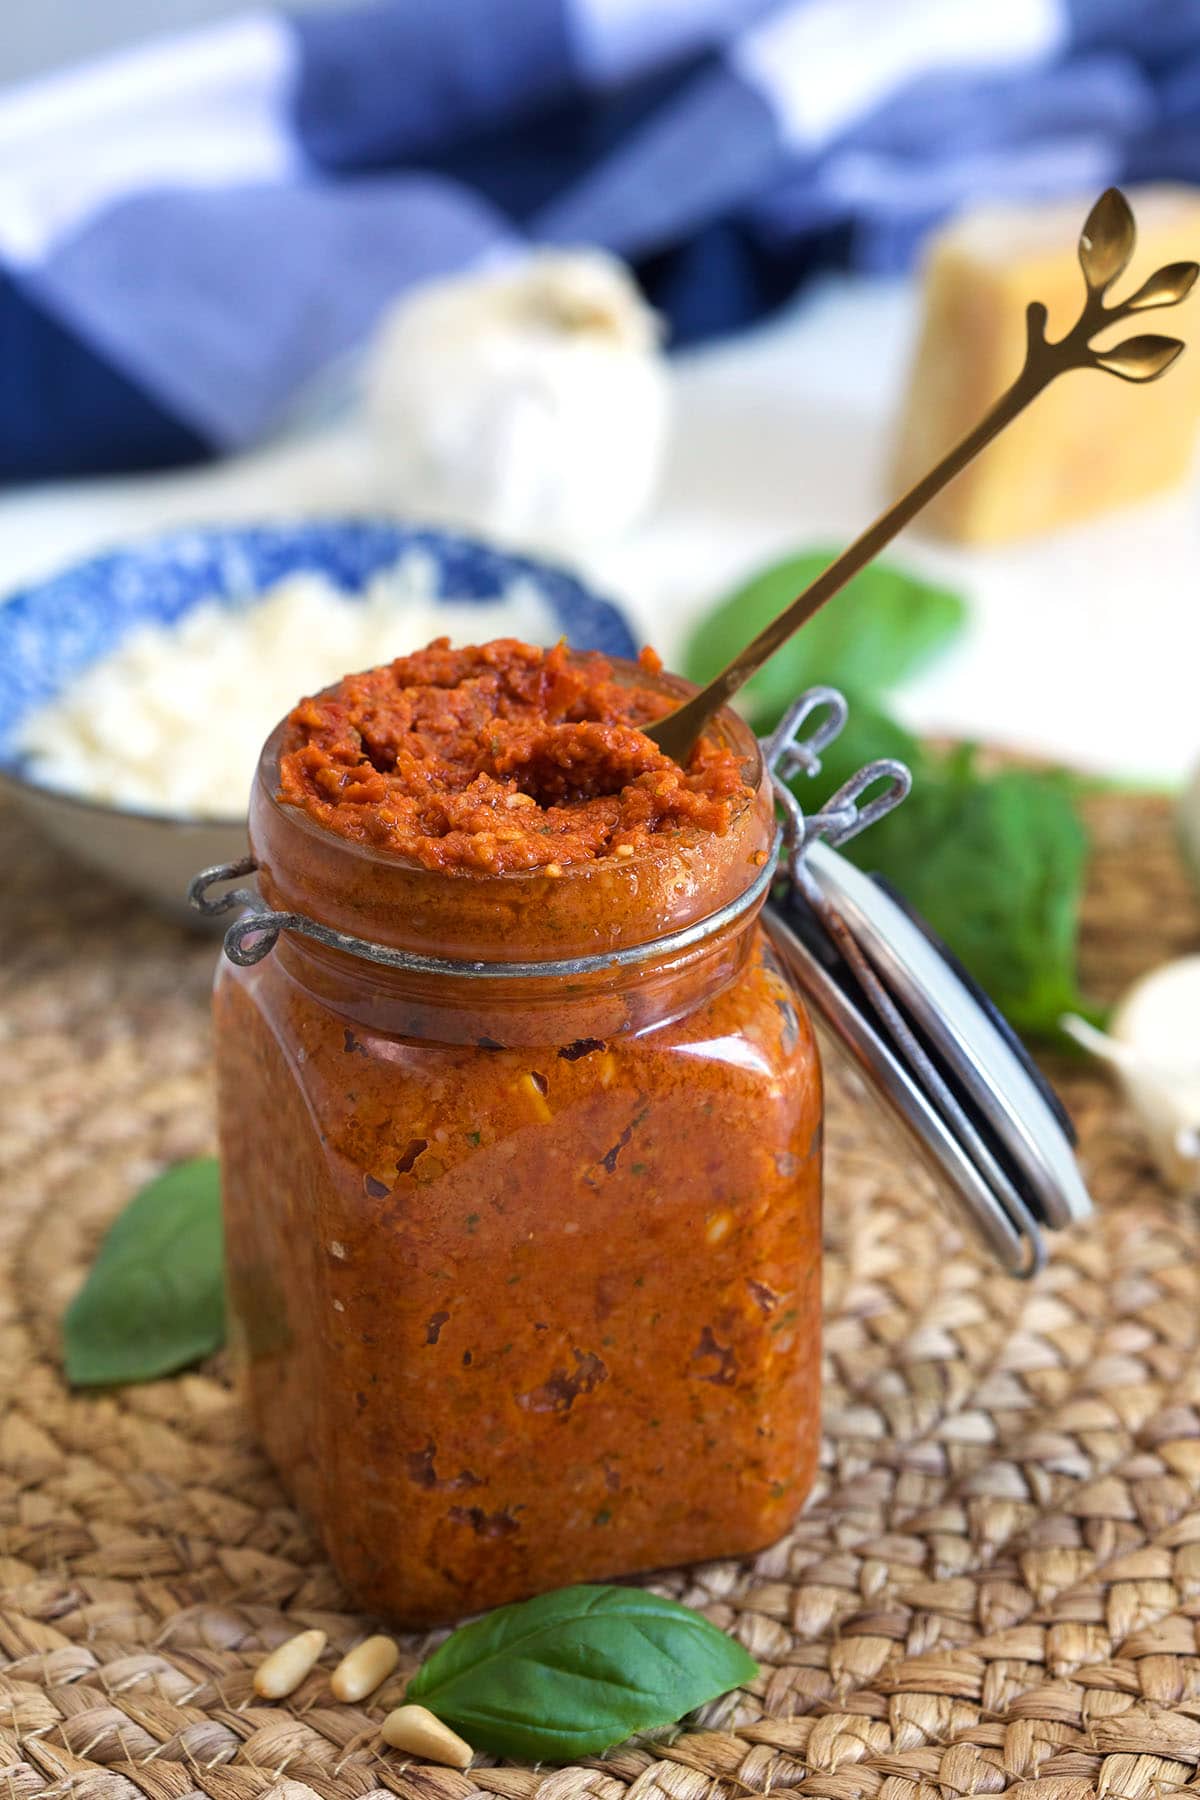 A long spoon is placed in a full jar of tomato pesto.